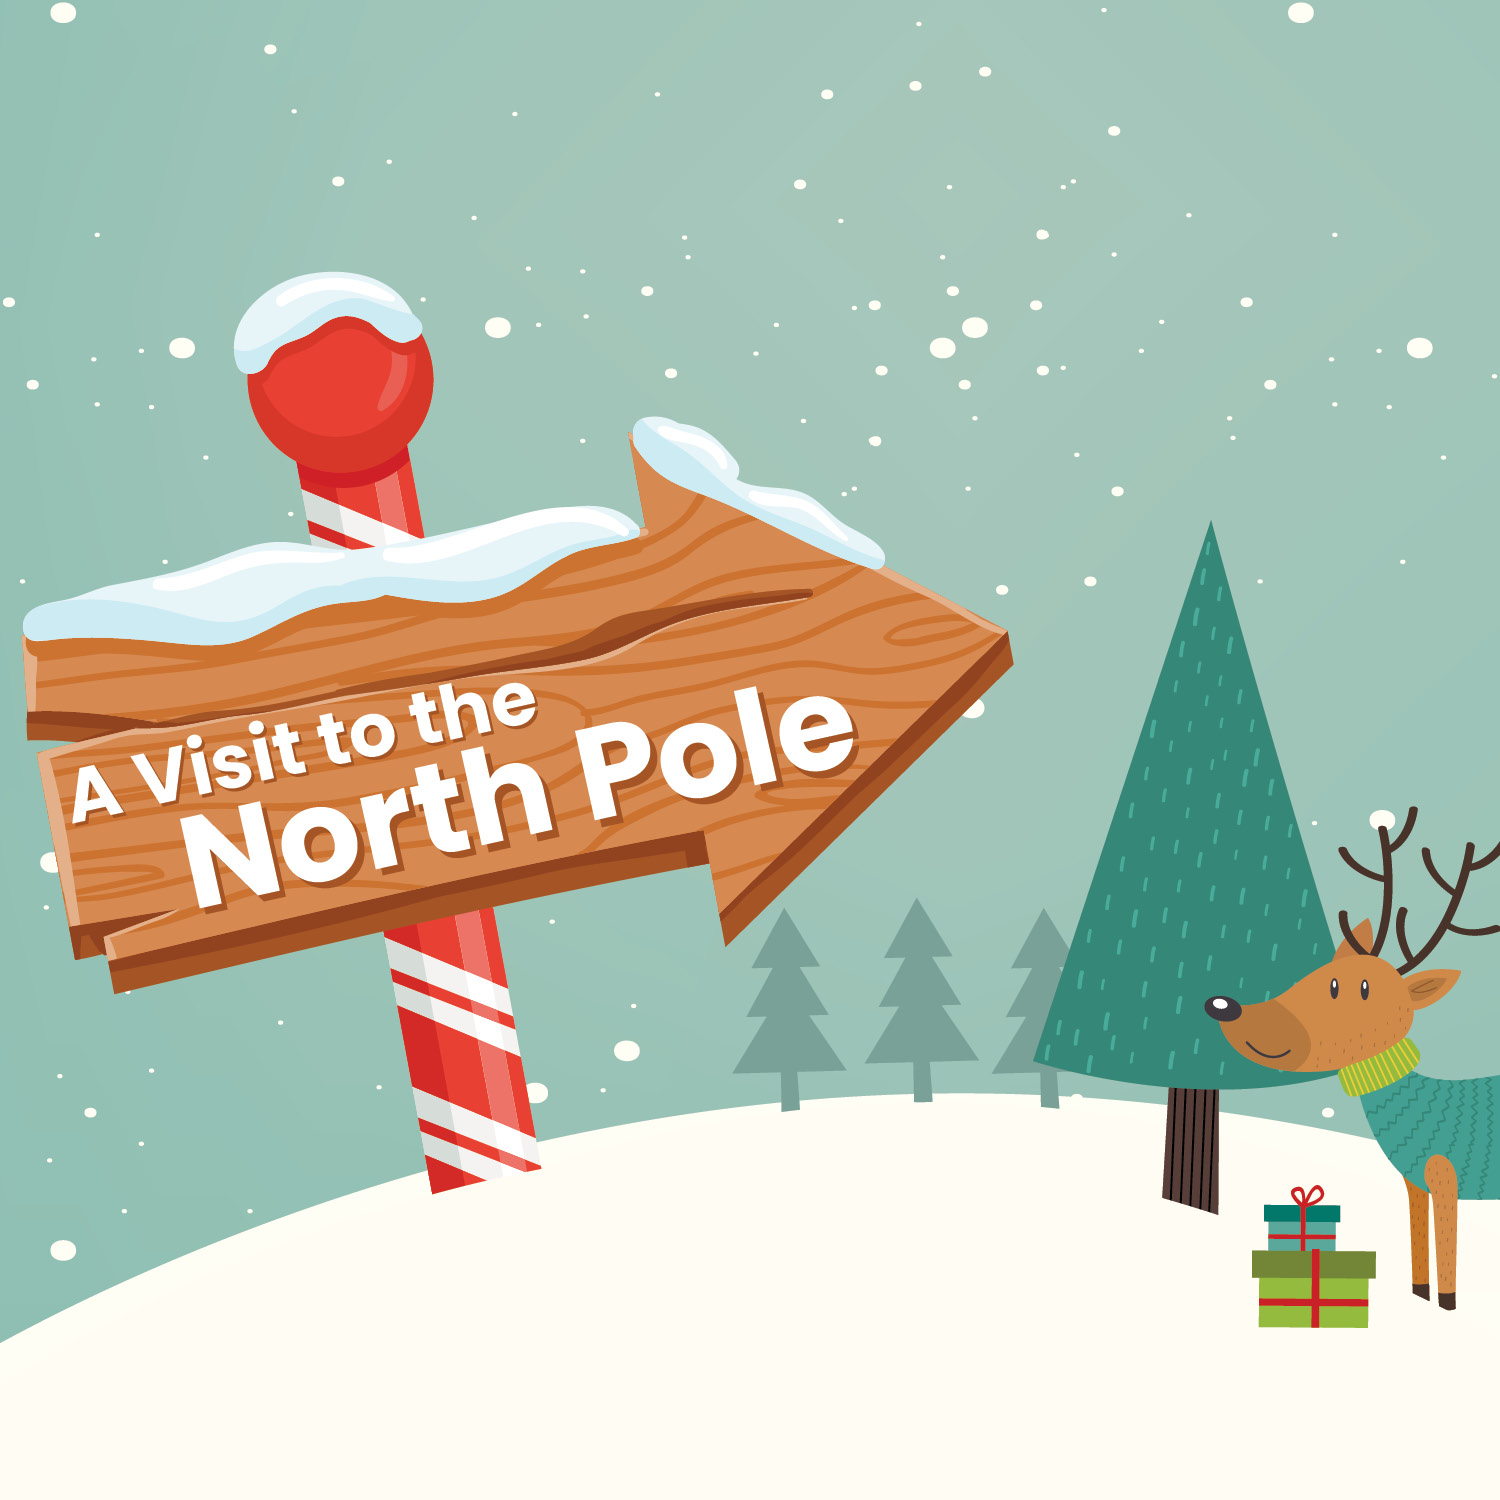 Illustration of snow scene. Wooden sign that says A Visit to the North Pole. The sign is pointing towards pine trees, a reindeer, and presents.